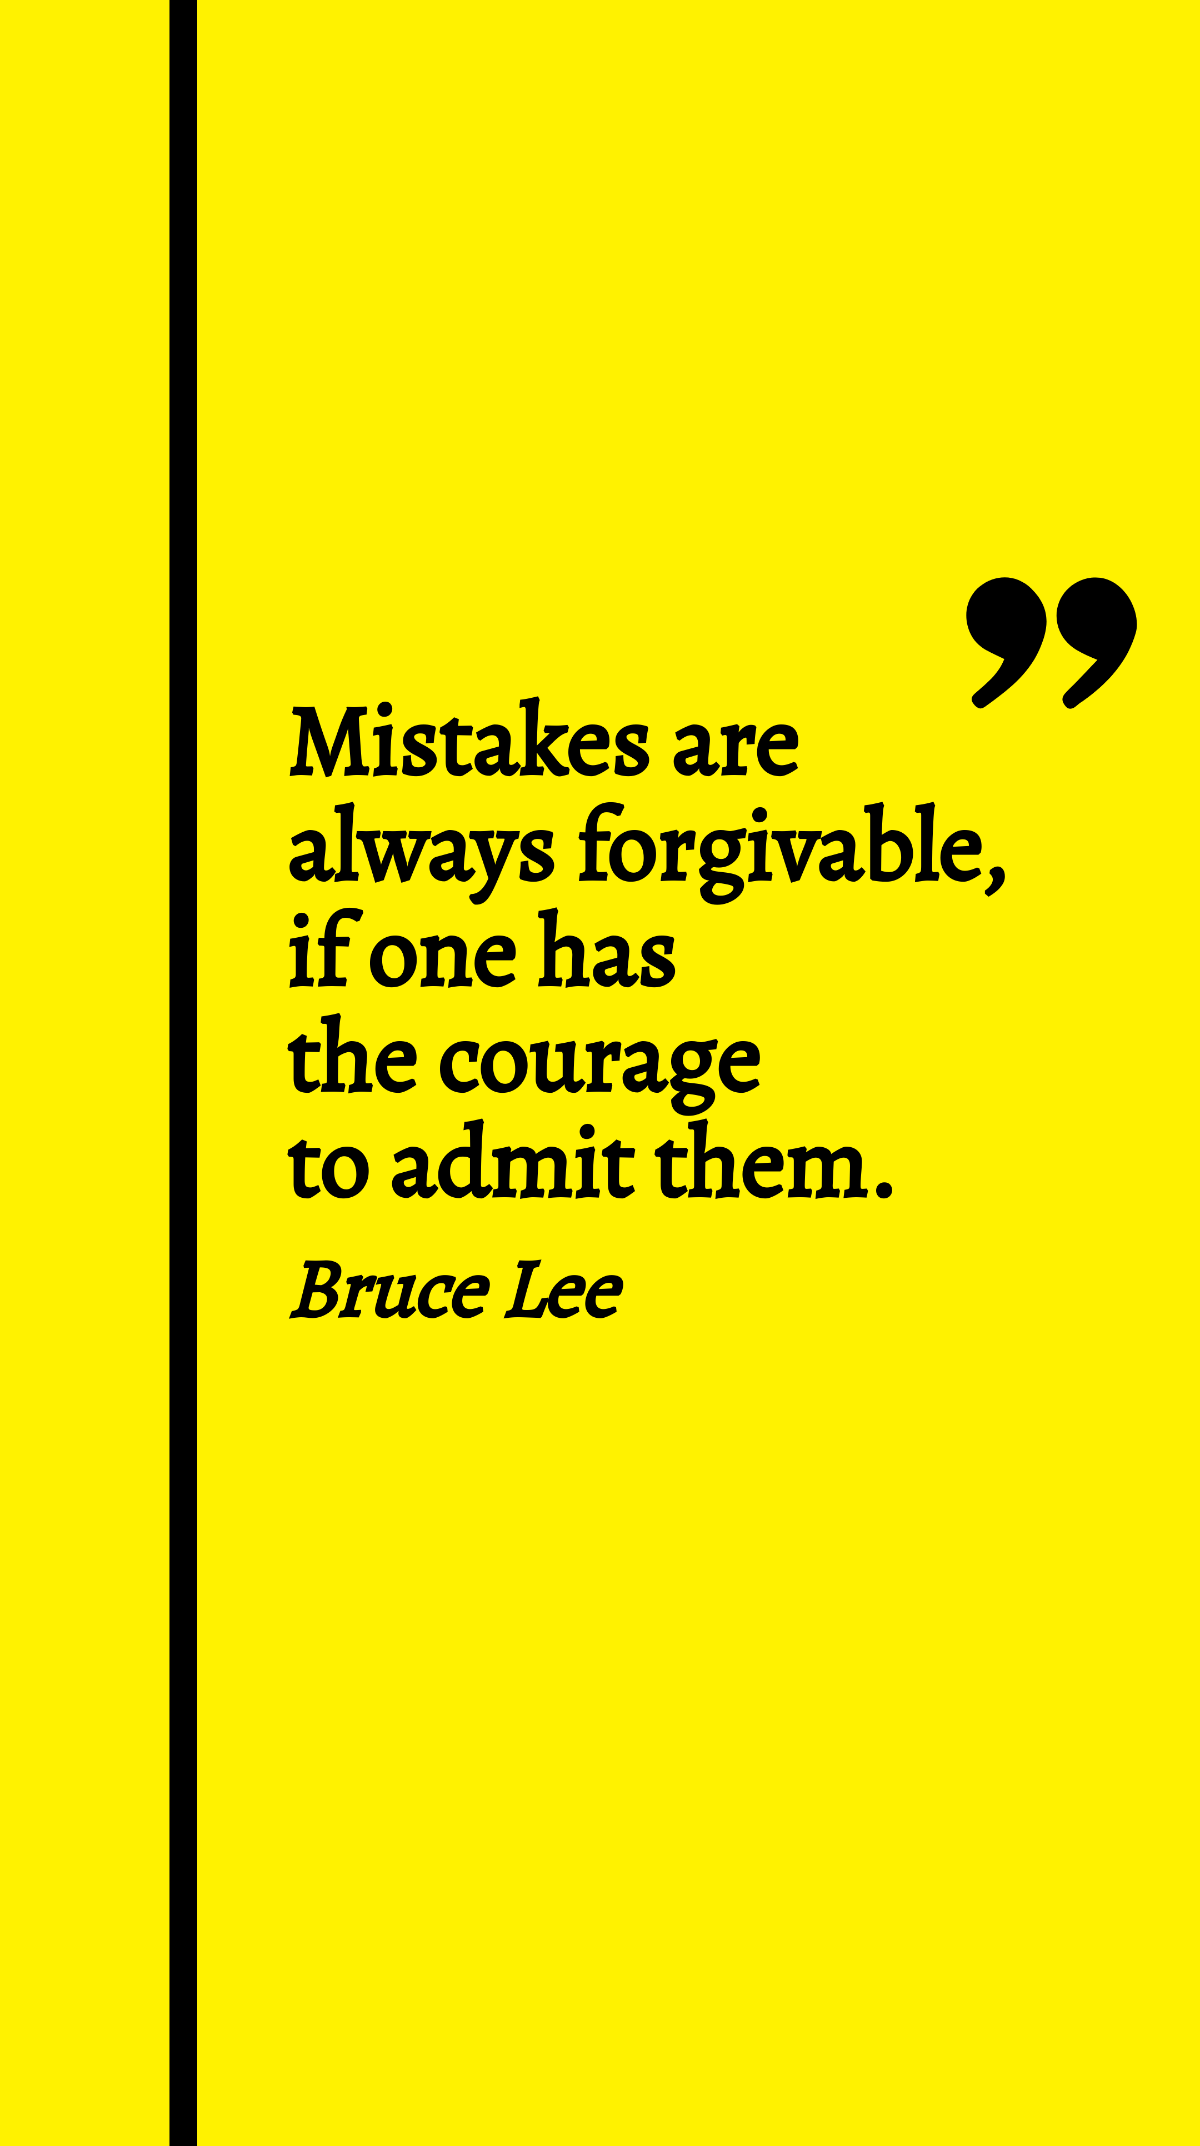 Bruce Lee - Mistakes are always forgivable, if one has the courage to admit them.